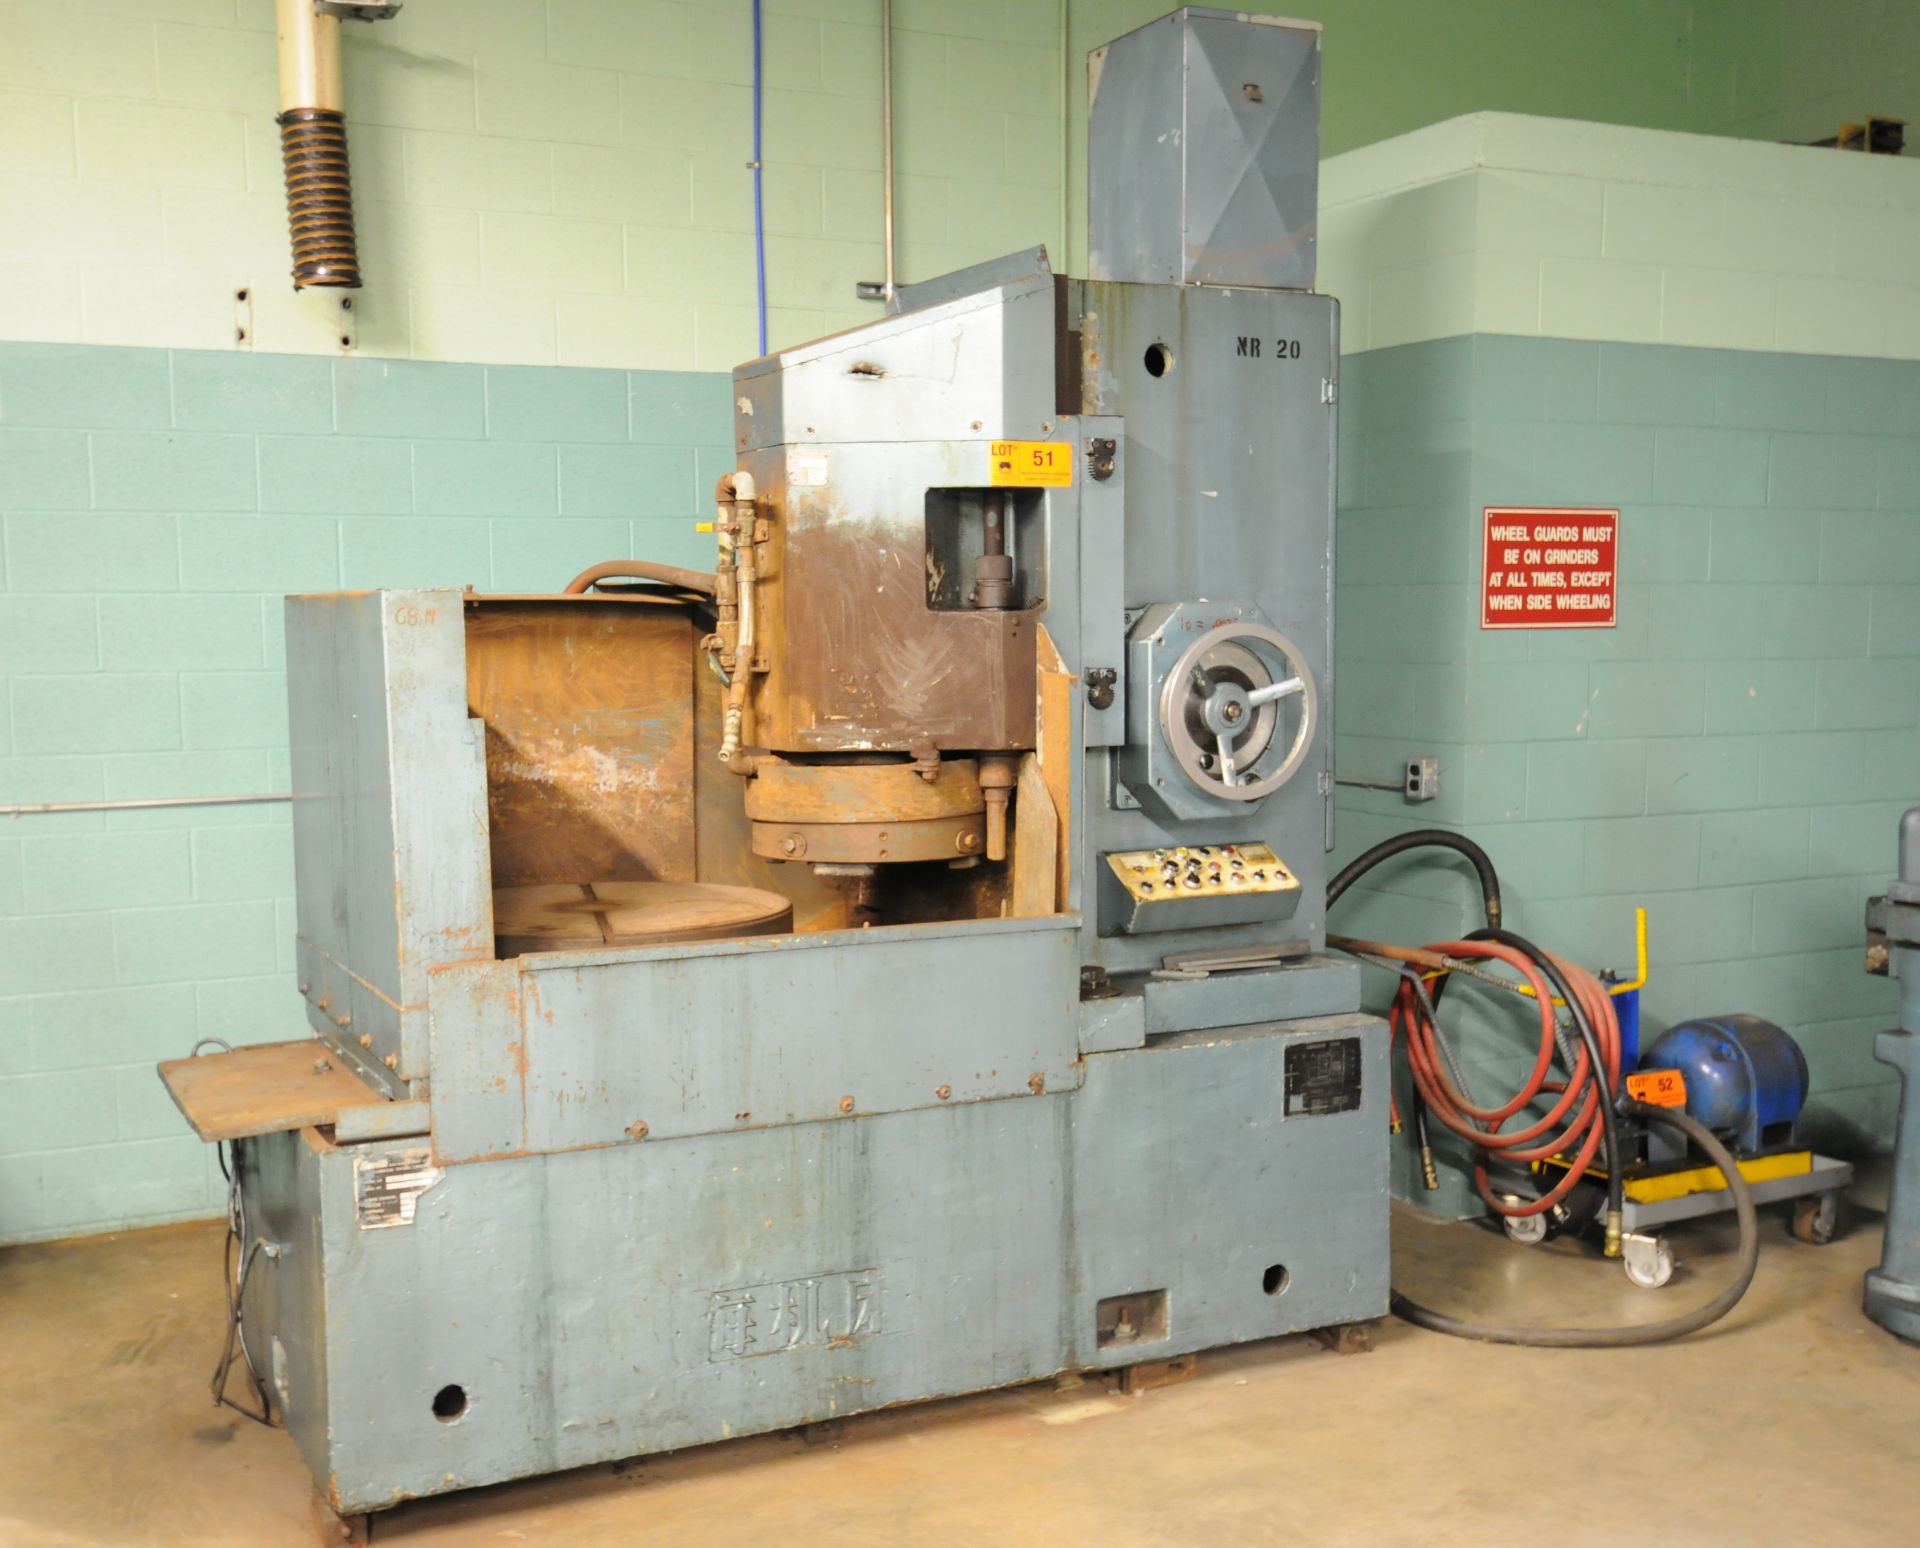 HAVLIK M7475B ROTARY SURFACE GRINDER WITH 30" MAGNETIC CHUCK, 18" SEGMENTED WHEEL, COOLANT S/N: 1044